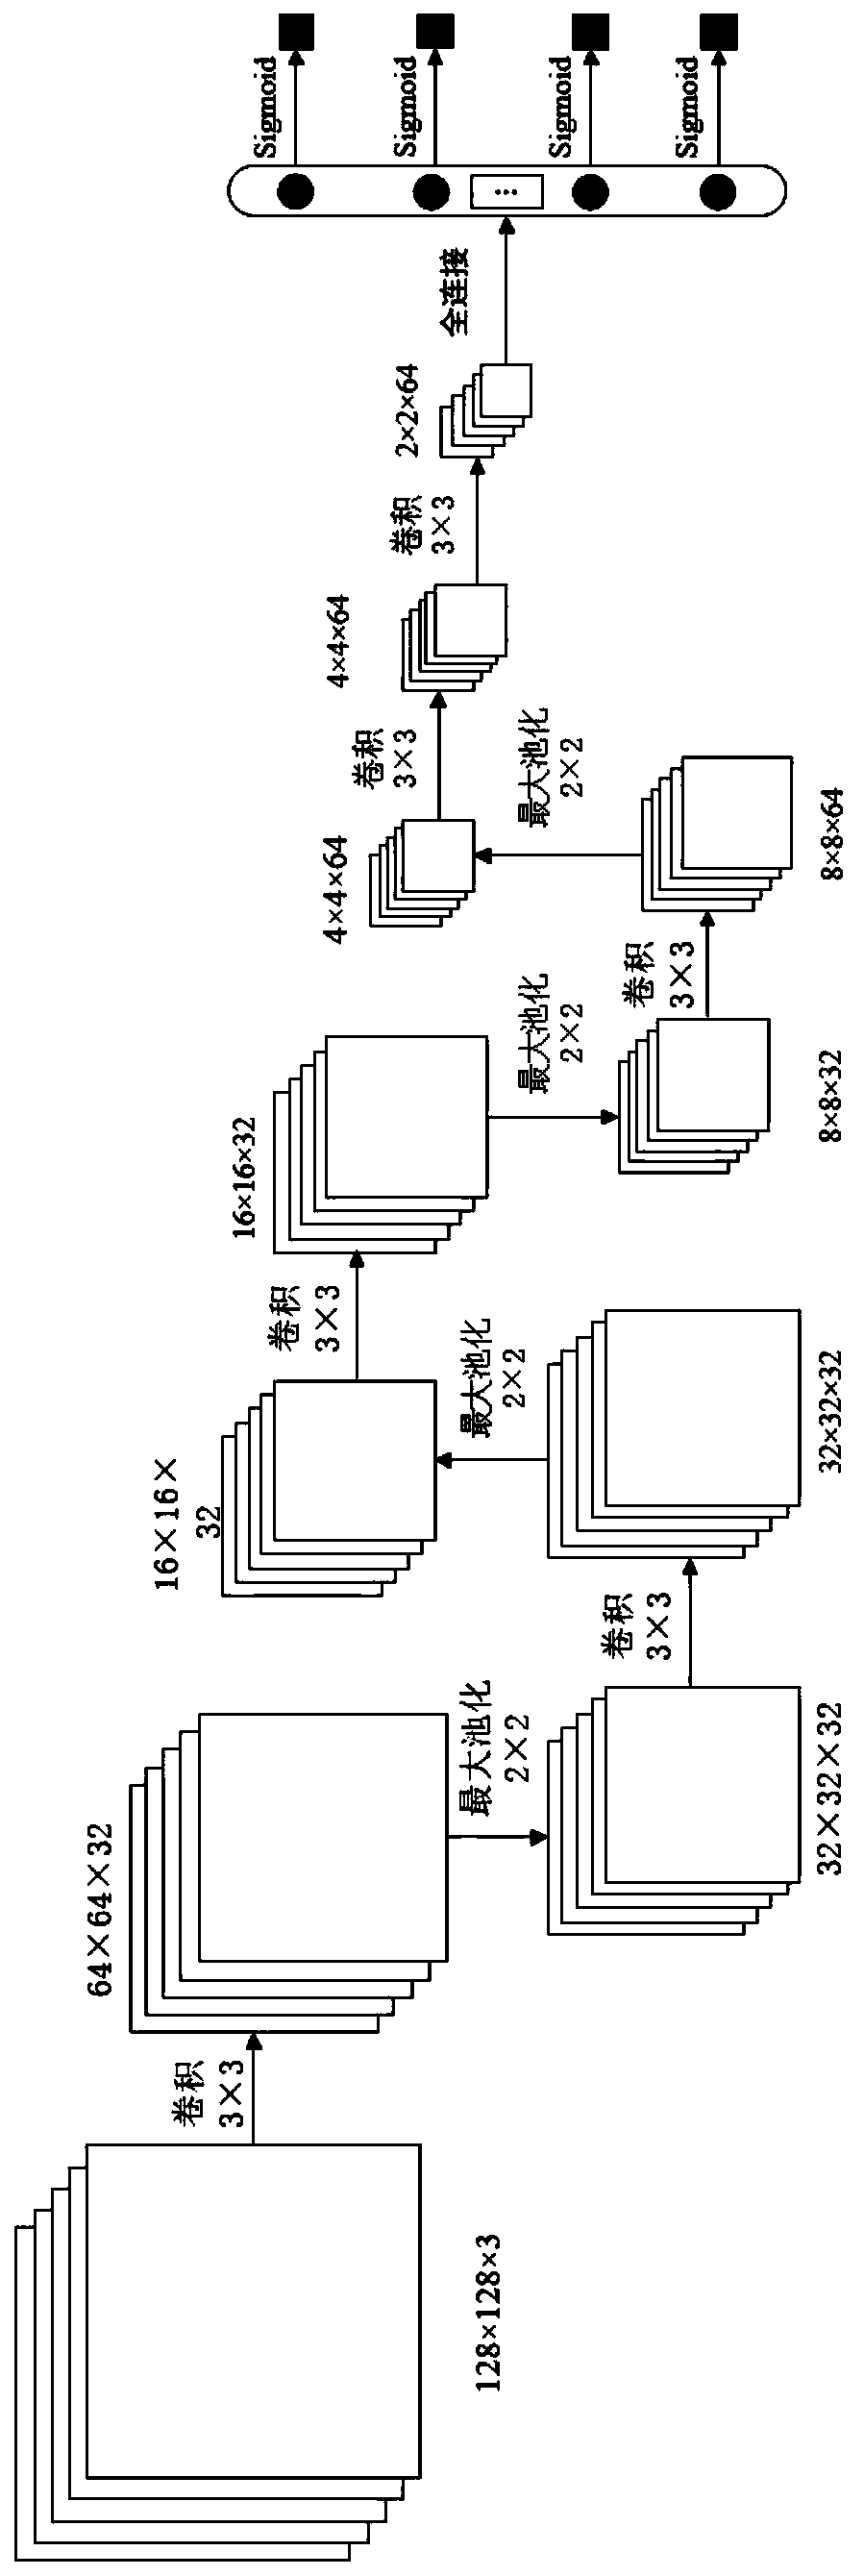 Gear box single and composite fault diagnosis method, equipment and system